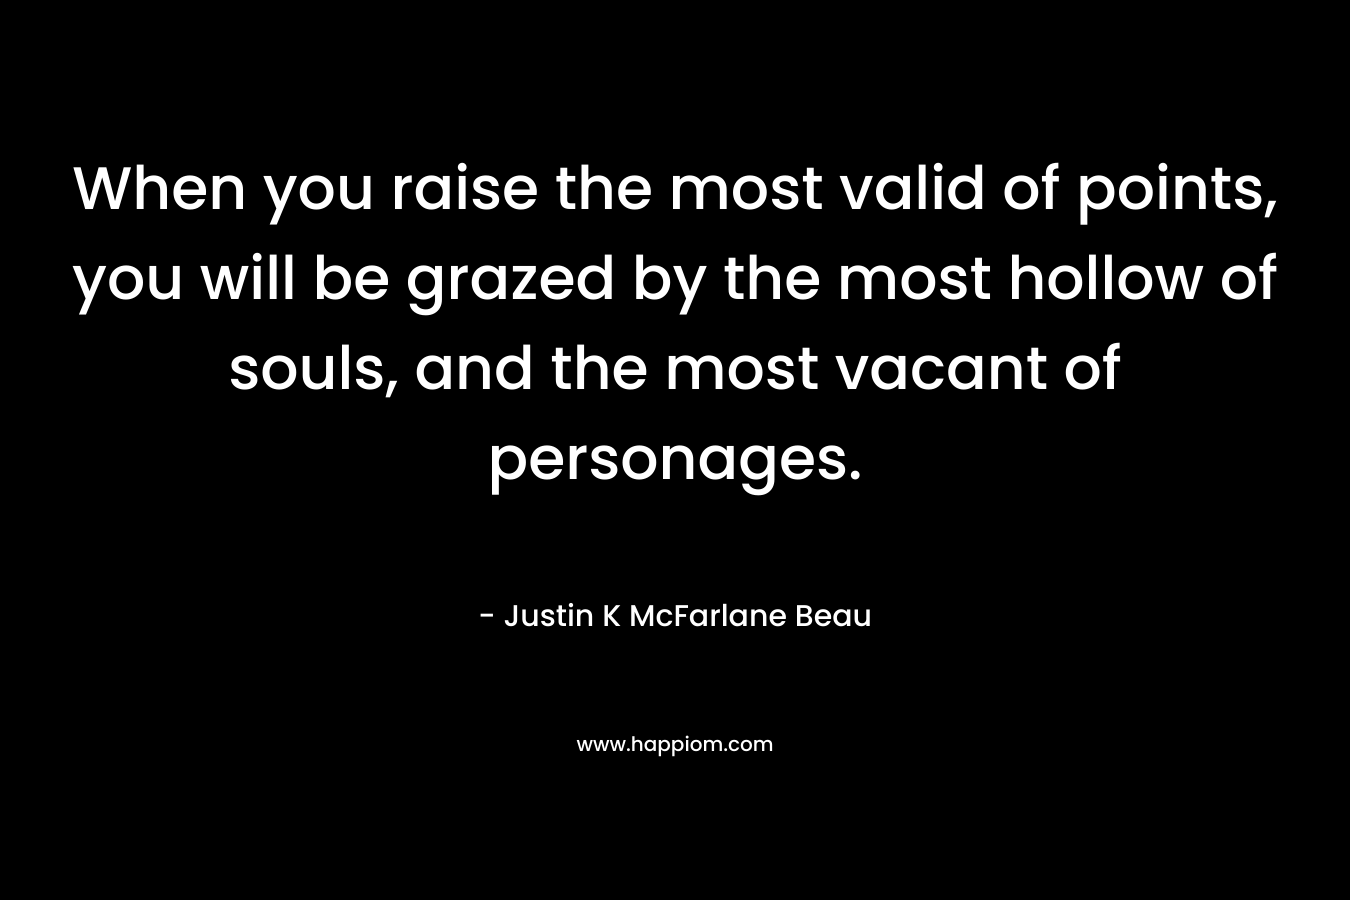 When you raise the most valid of points, you will be grazed by the most hollow of souls, and the most vacant of personages. – Justin K McFarlane Beau